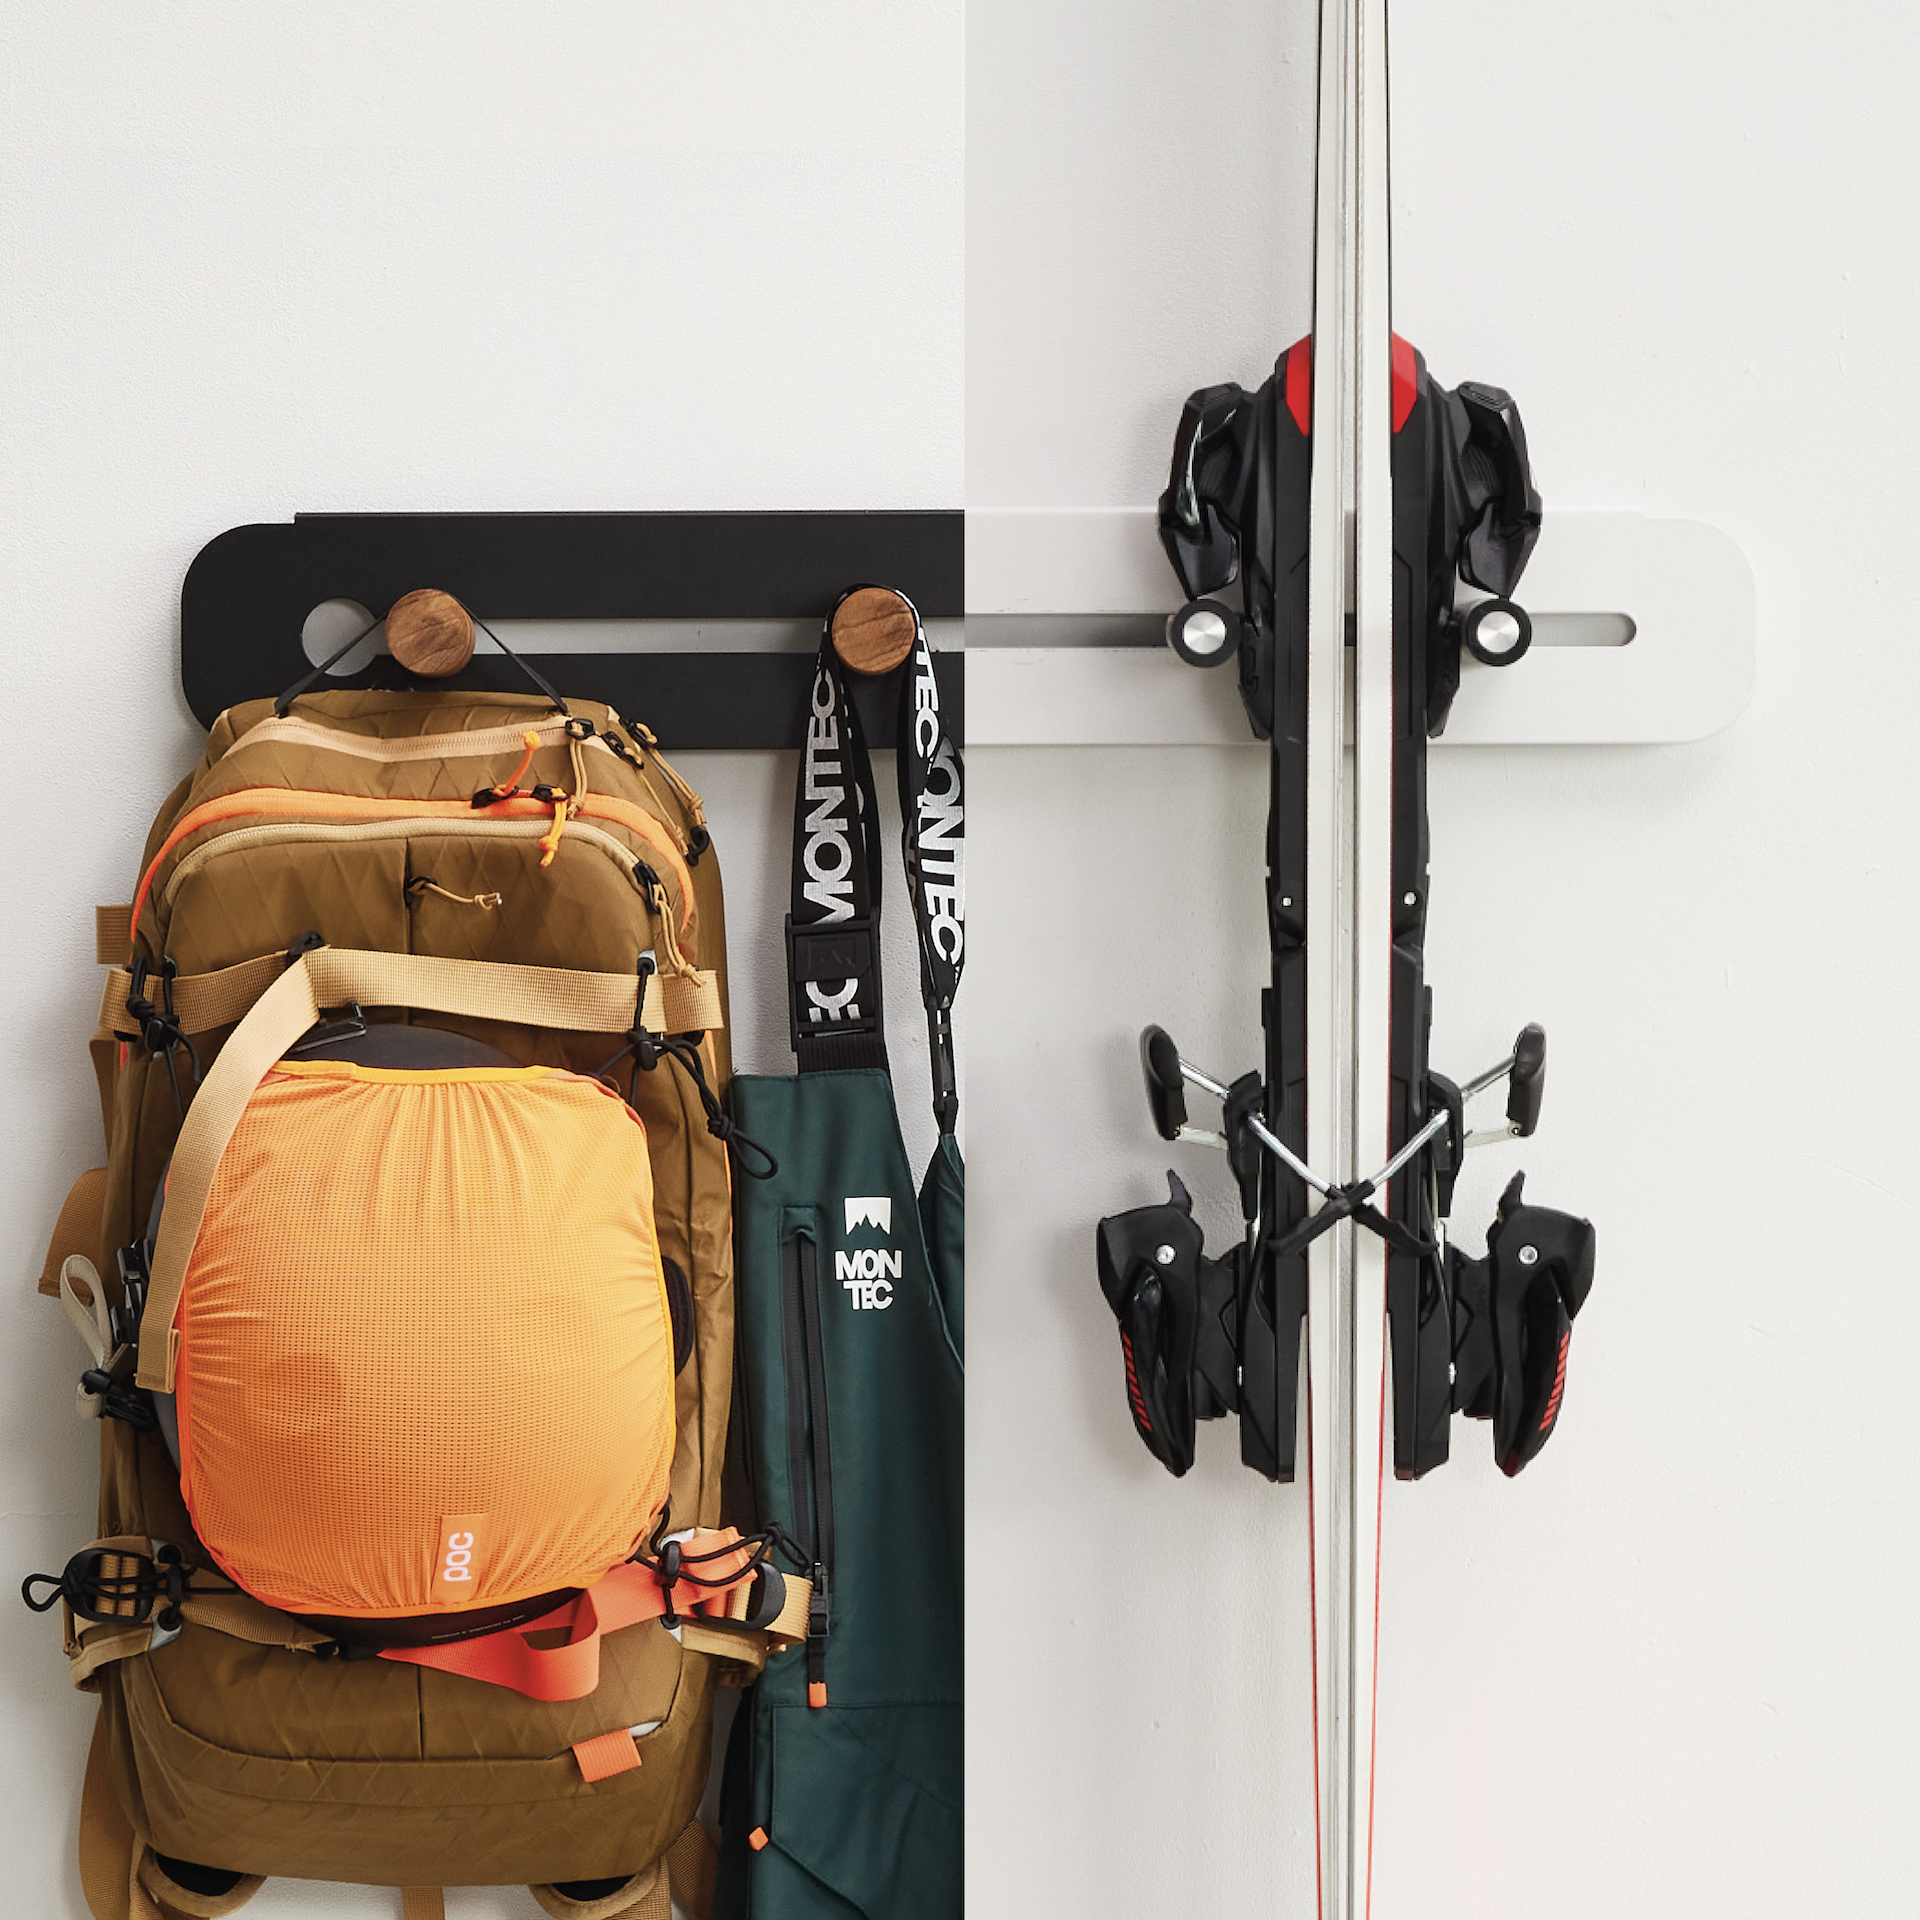 Bonnes intentions Coat and ski wall mount storage